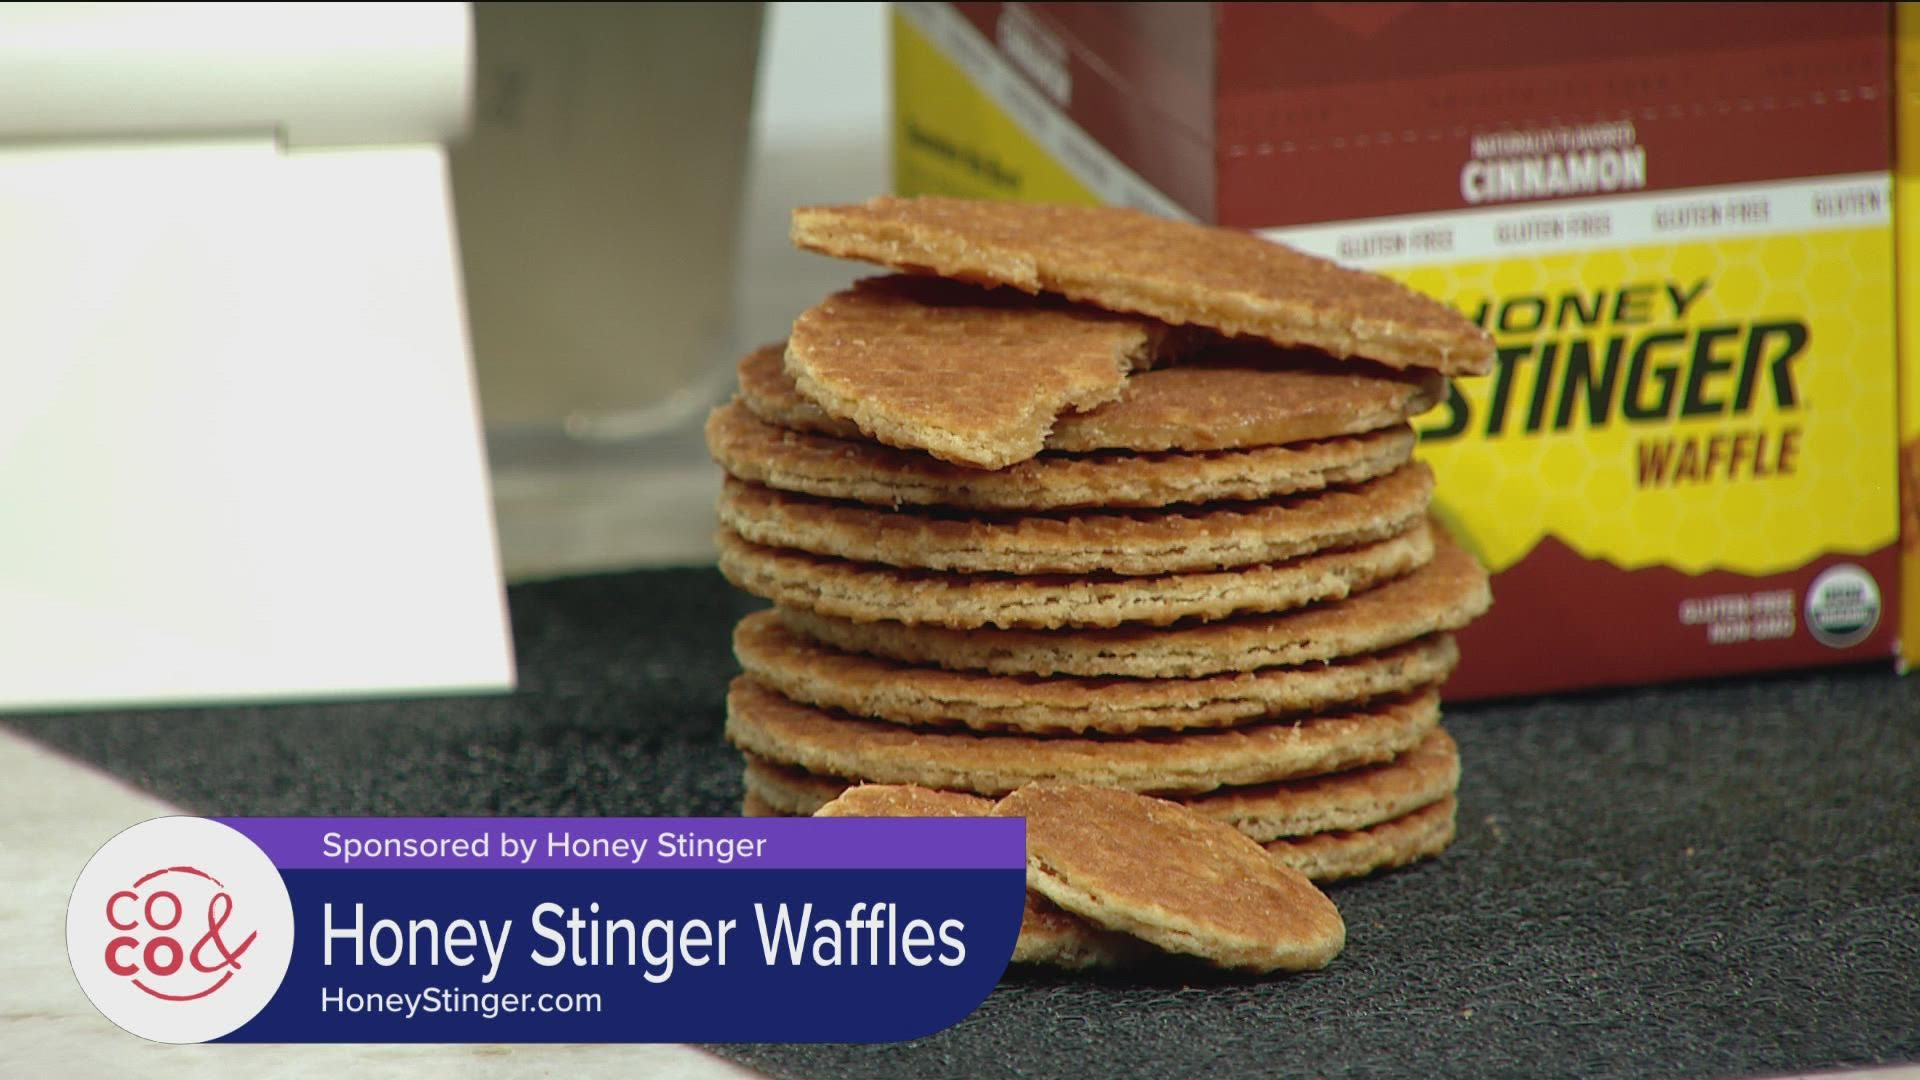 Find Honey Stinger Original Organic Waffles at your local King Soopers--your home for Optimum Wellness. **PAID CONTENT**